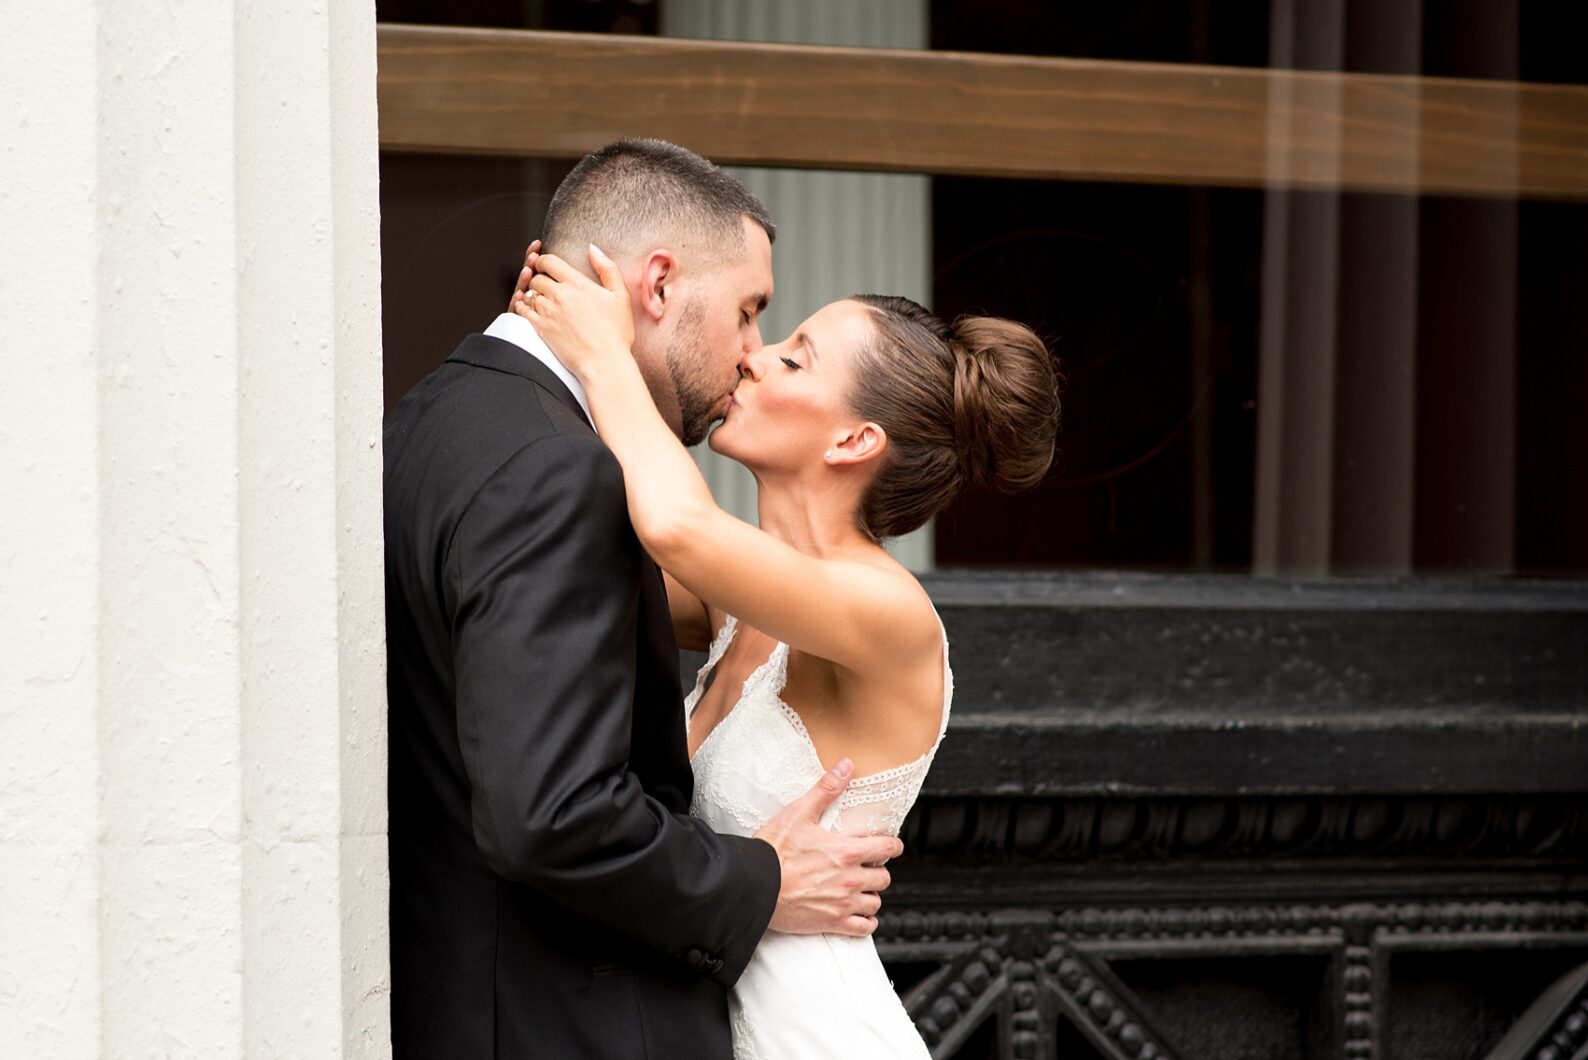 Mikkel Paige Photography photos of a luxury wedding in NYC. Image of the bride and groom near Washington Square Park kissing between white columns.